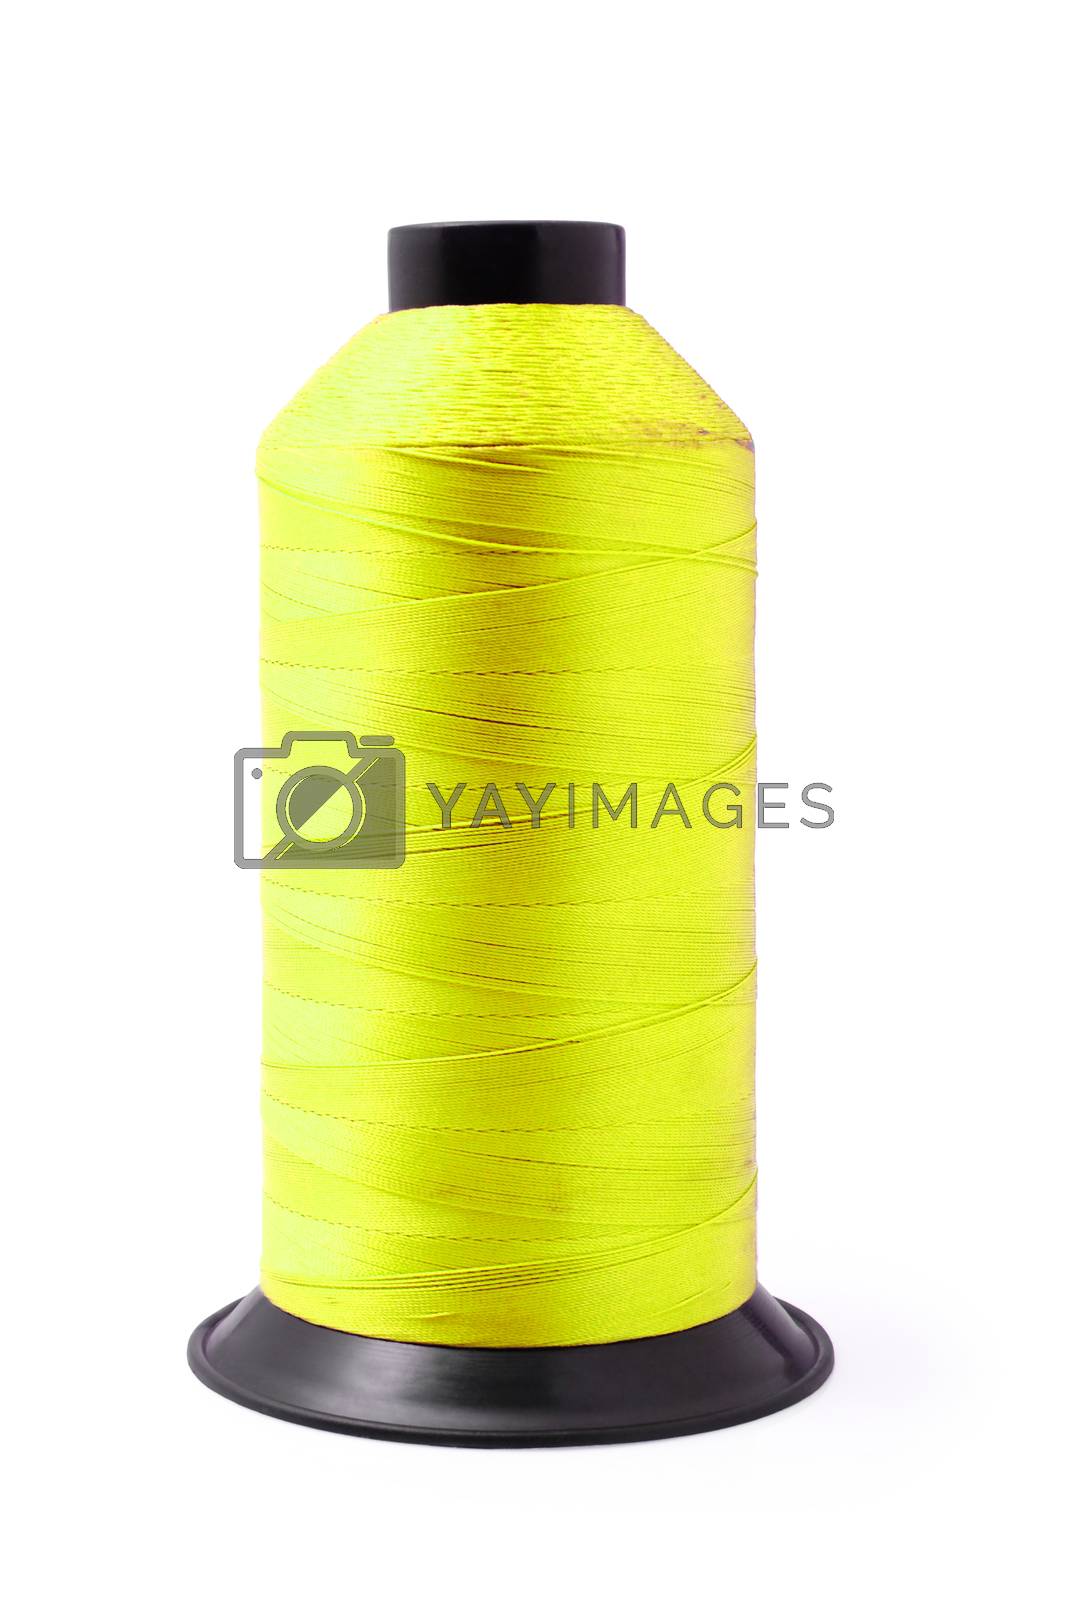 Royalty free image of Yellow sewing thread isolated with clipping path.     by phalakon